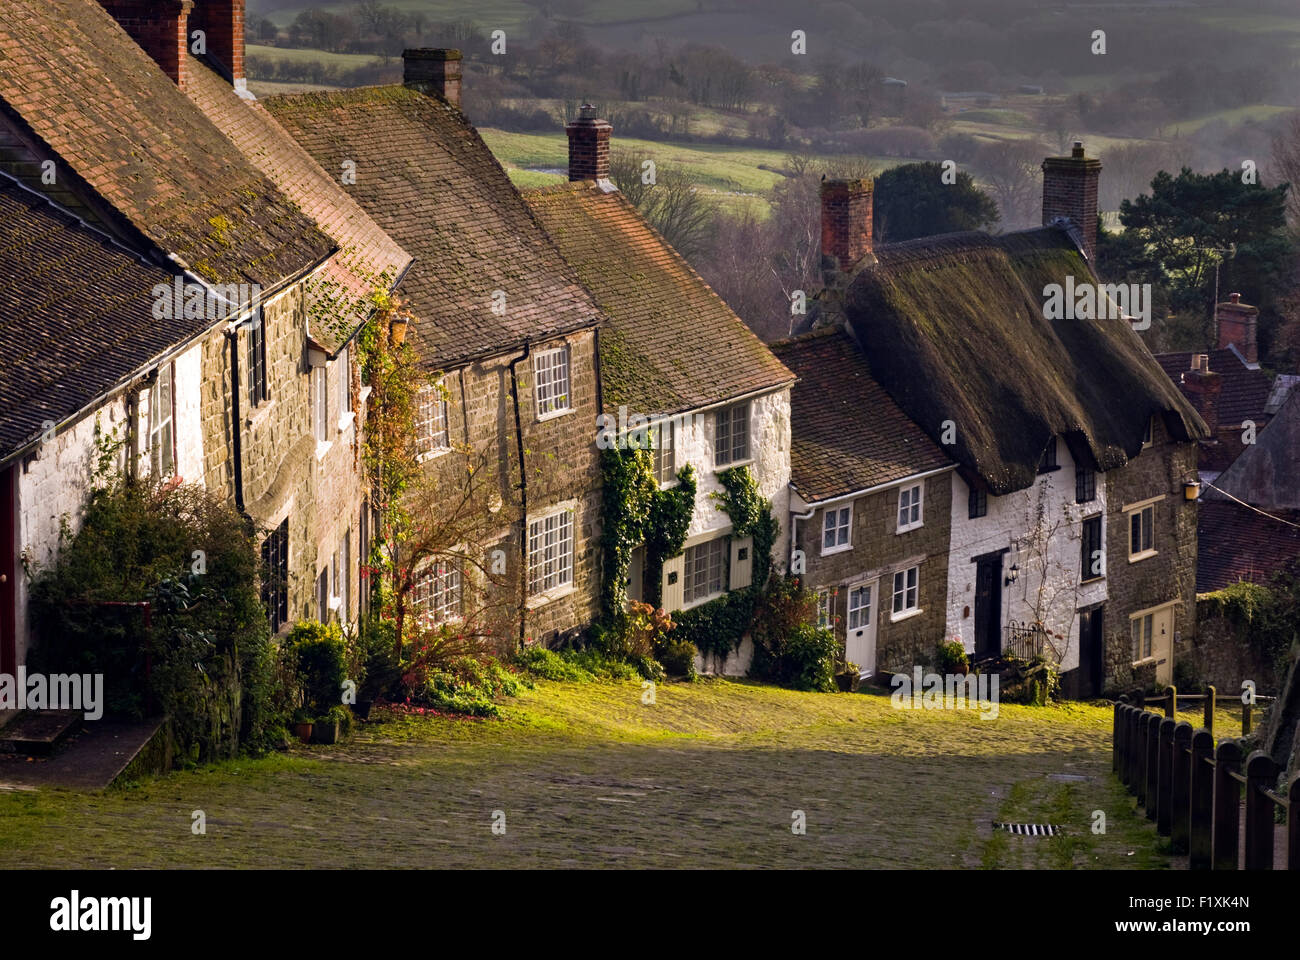 Looking down Gold Hill in the North Dorset town of Shaftesbury, famed for being the setting for a Hovis bread advert. Stock Photo